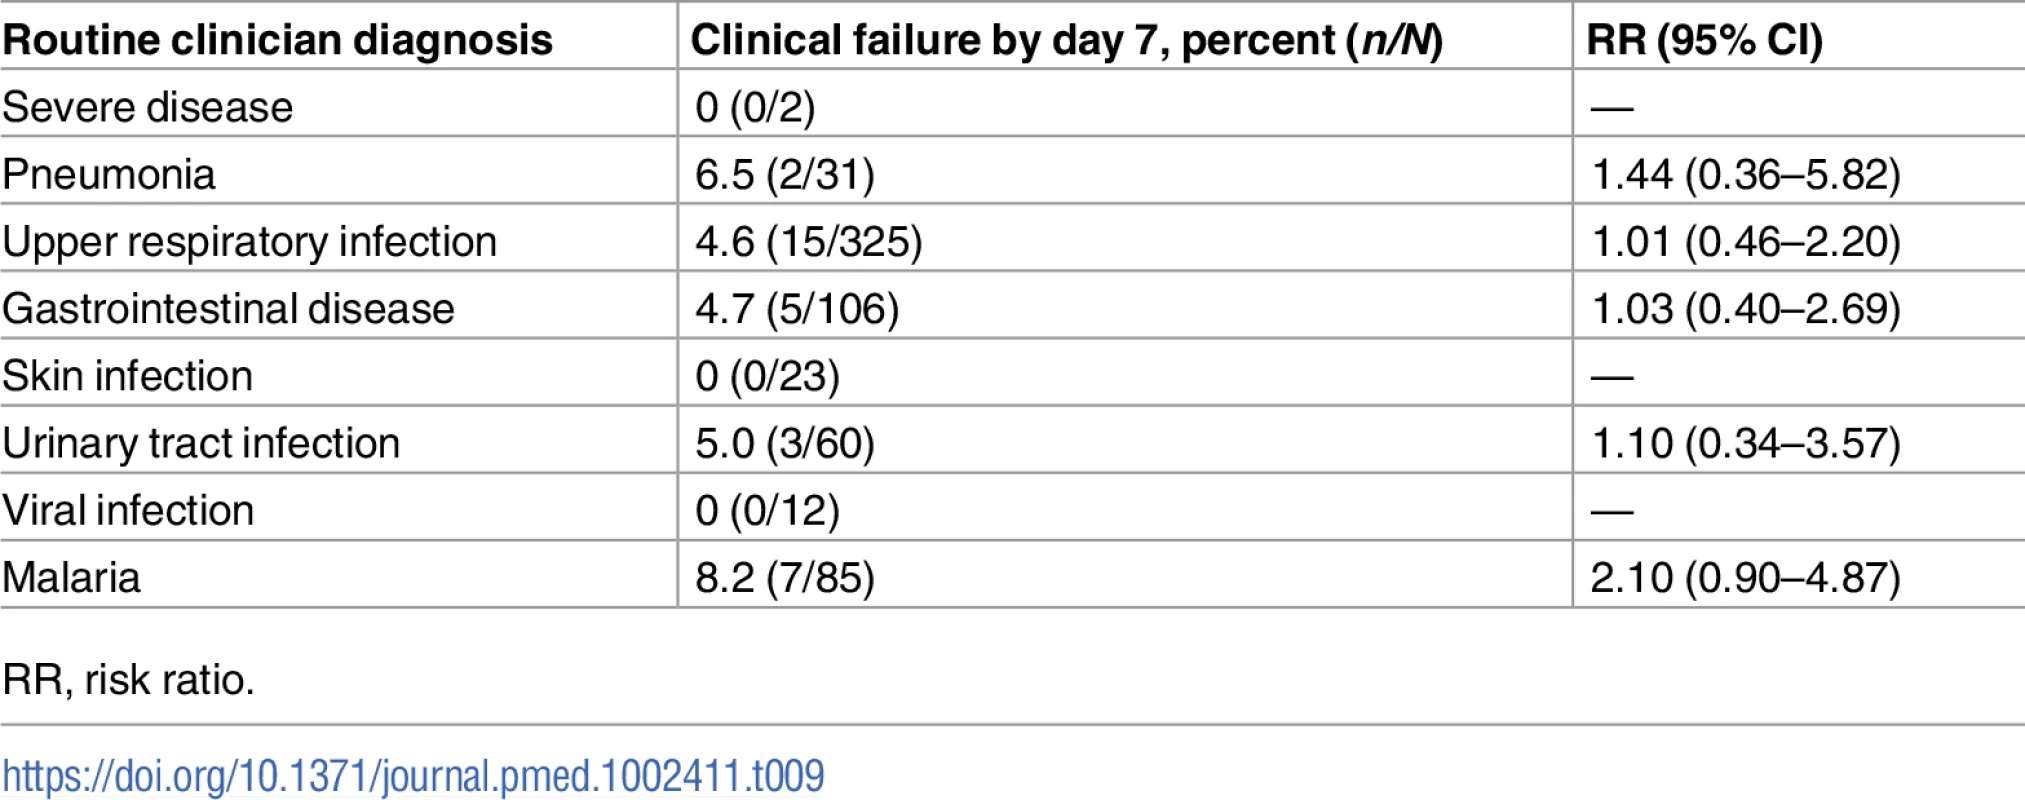 Association between clinical failure and diagnosis given by routine clinicians at day 0.